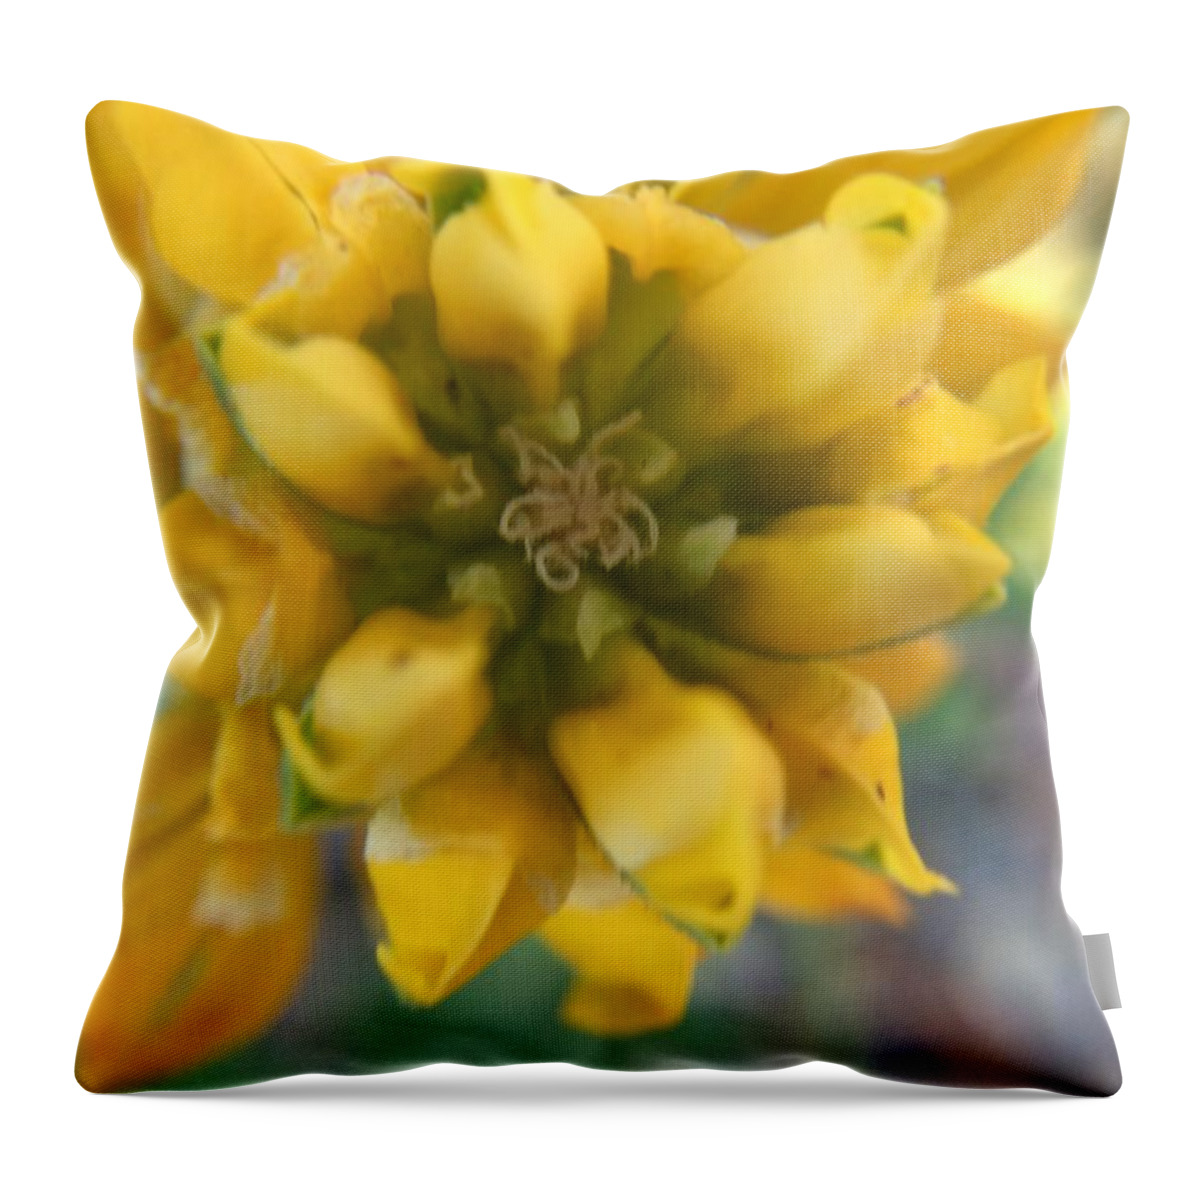 Yellow Rose Throw Pillow featuring the photograph Dreamy Yellow Rose by Vivian Aumond